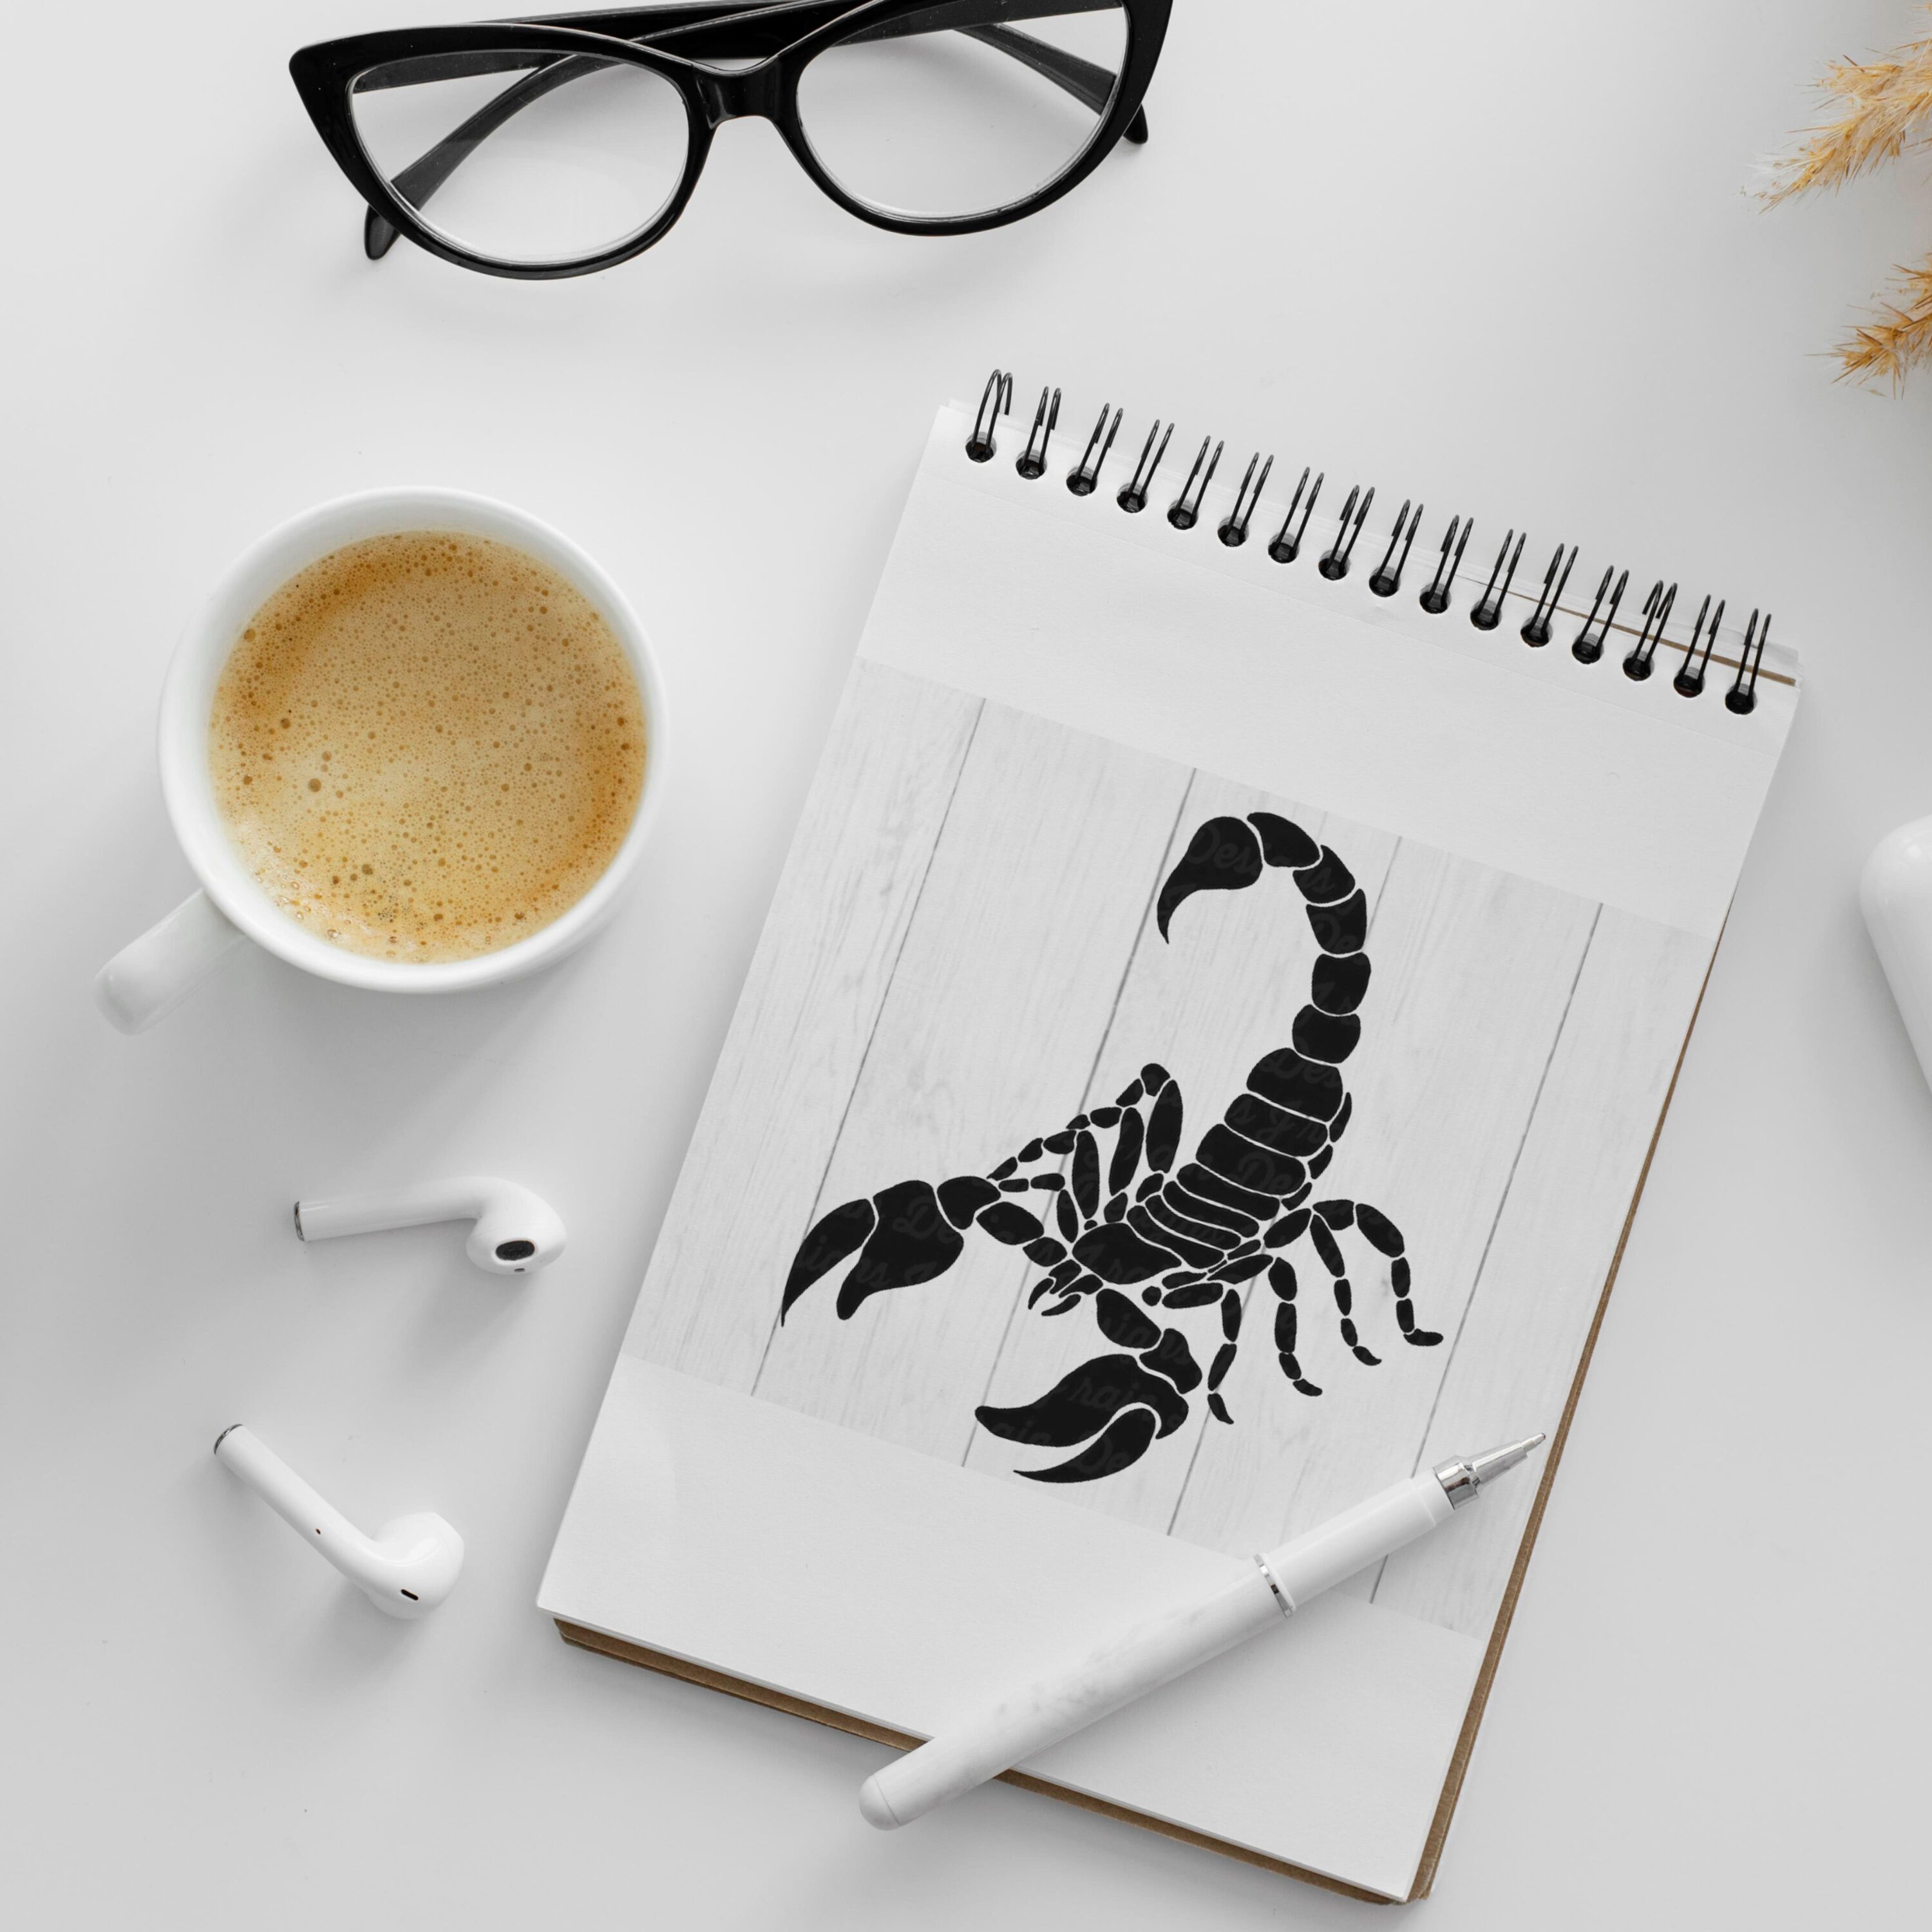 Add some creativity to your project with this print.